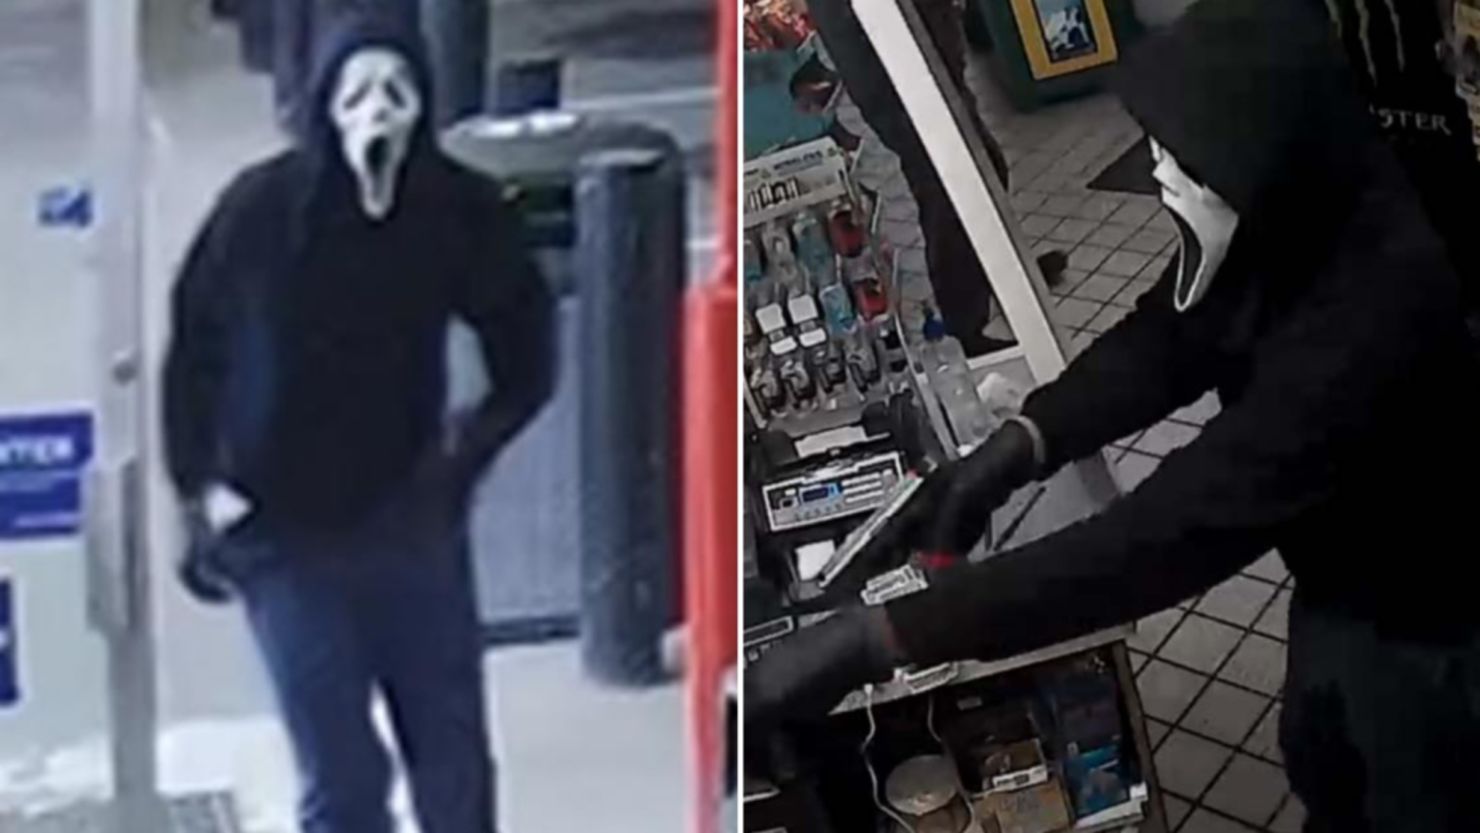 The FBI is offering a reward of up to $10,000 for information leading to the arrest and conviction of the "Scream Bandit" wanted for a series of armed commercial robberies in Virginia.